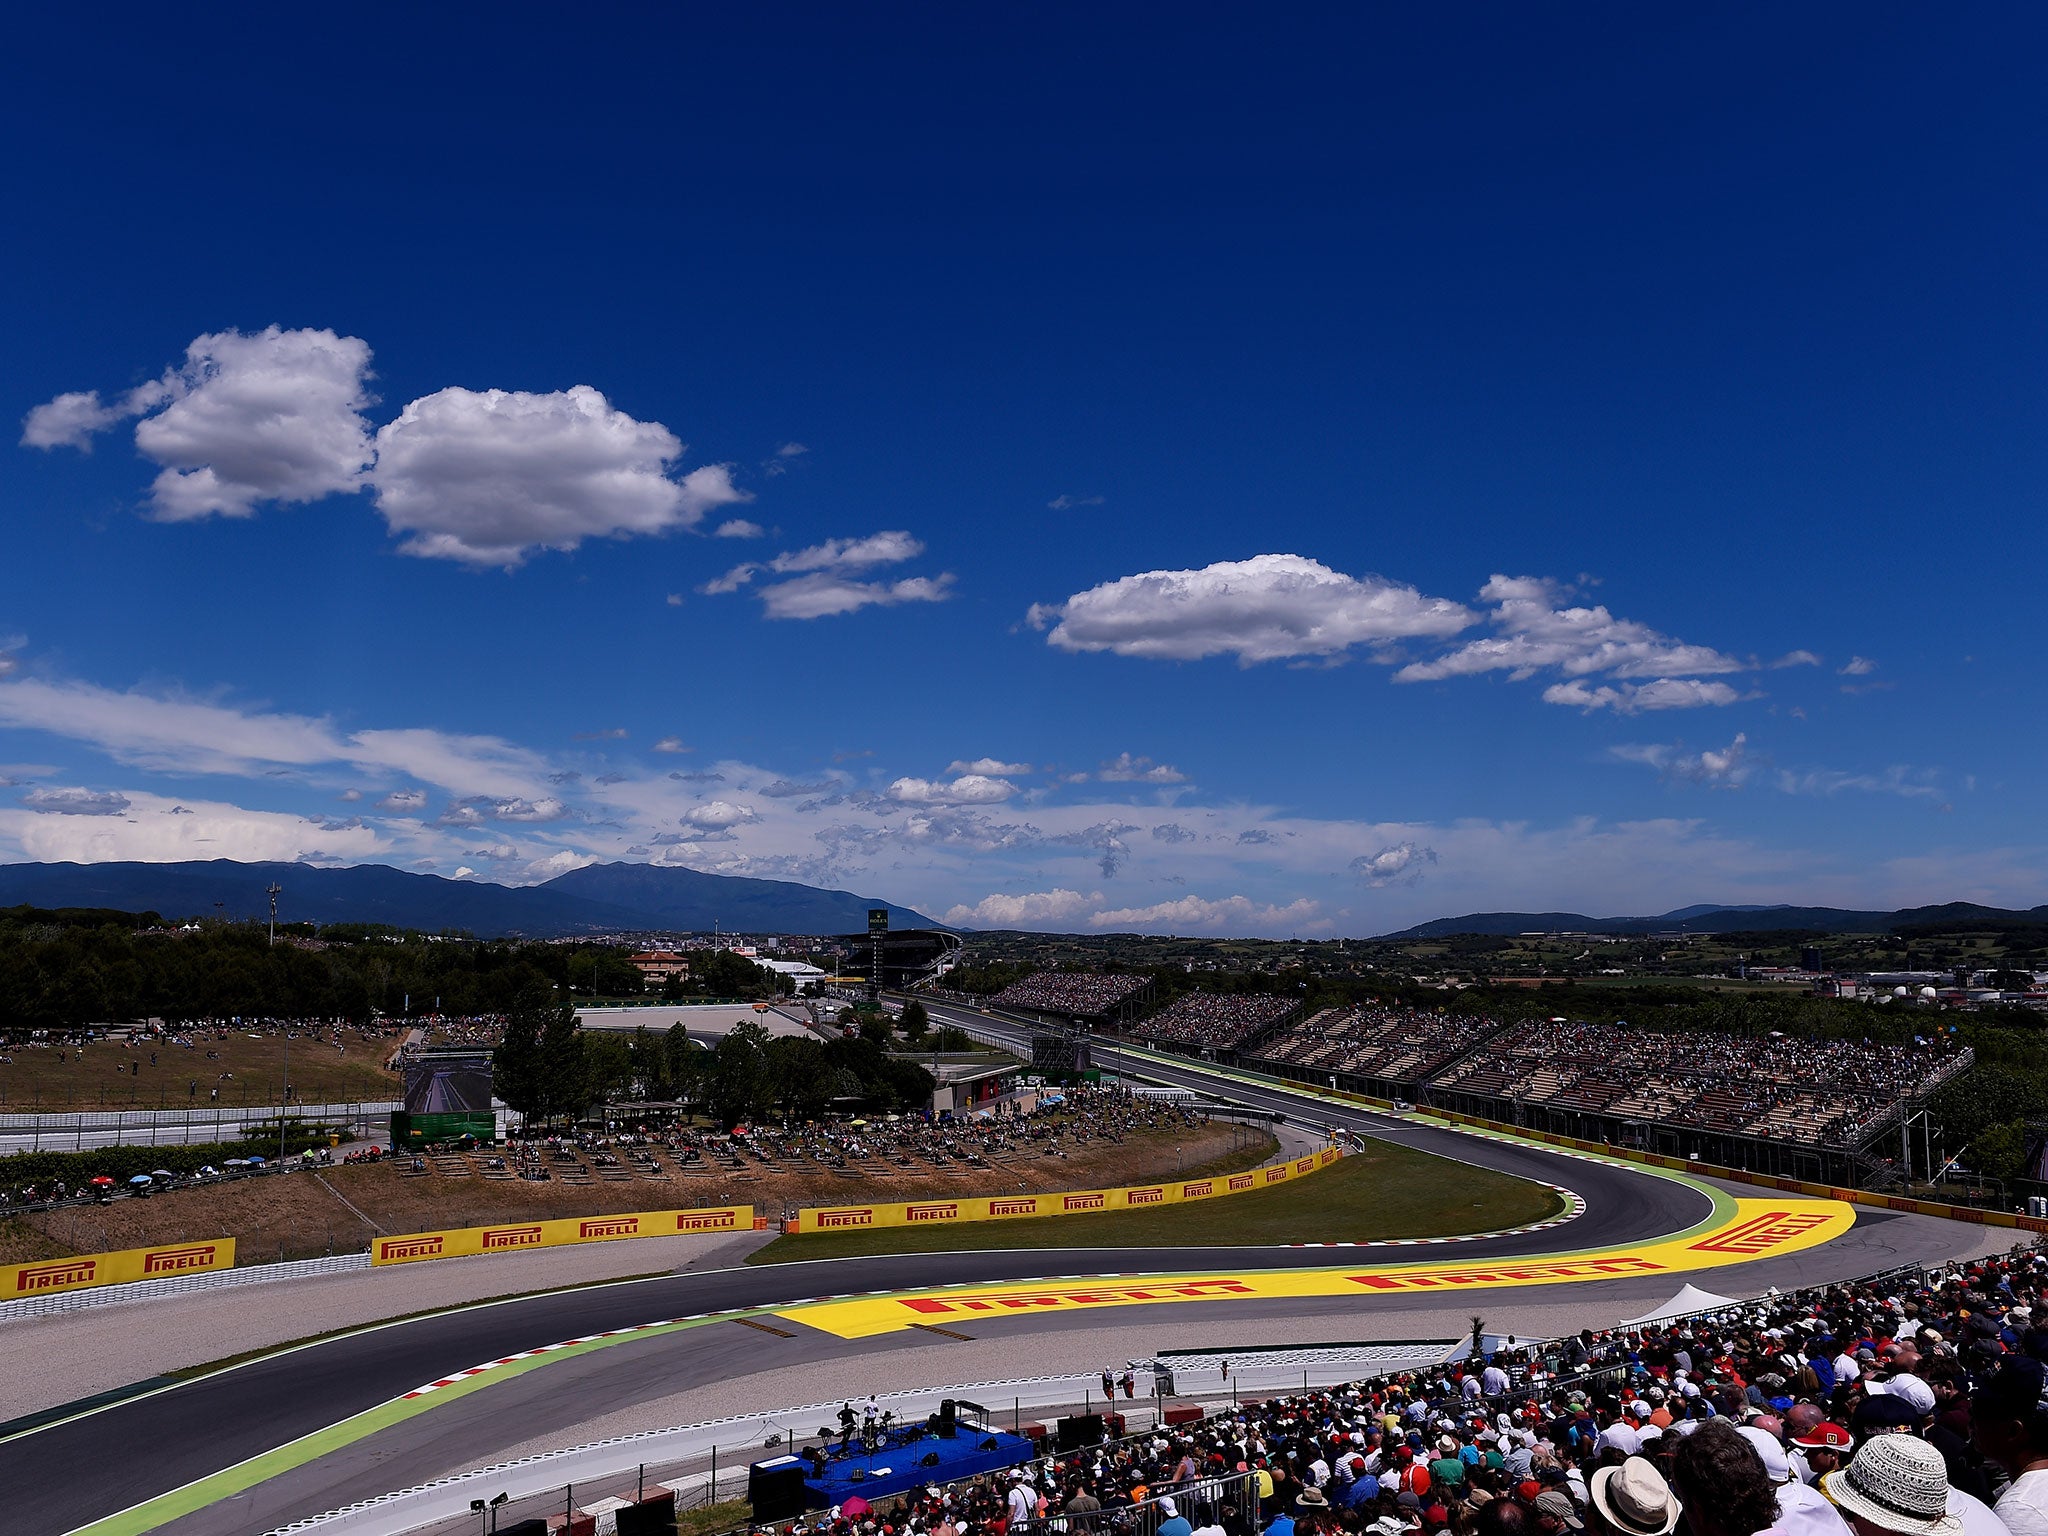 Circuit de Catalunya was resurfaced for the first time in 14 years at the start of the season